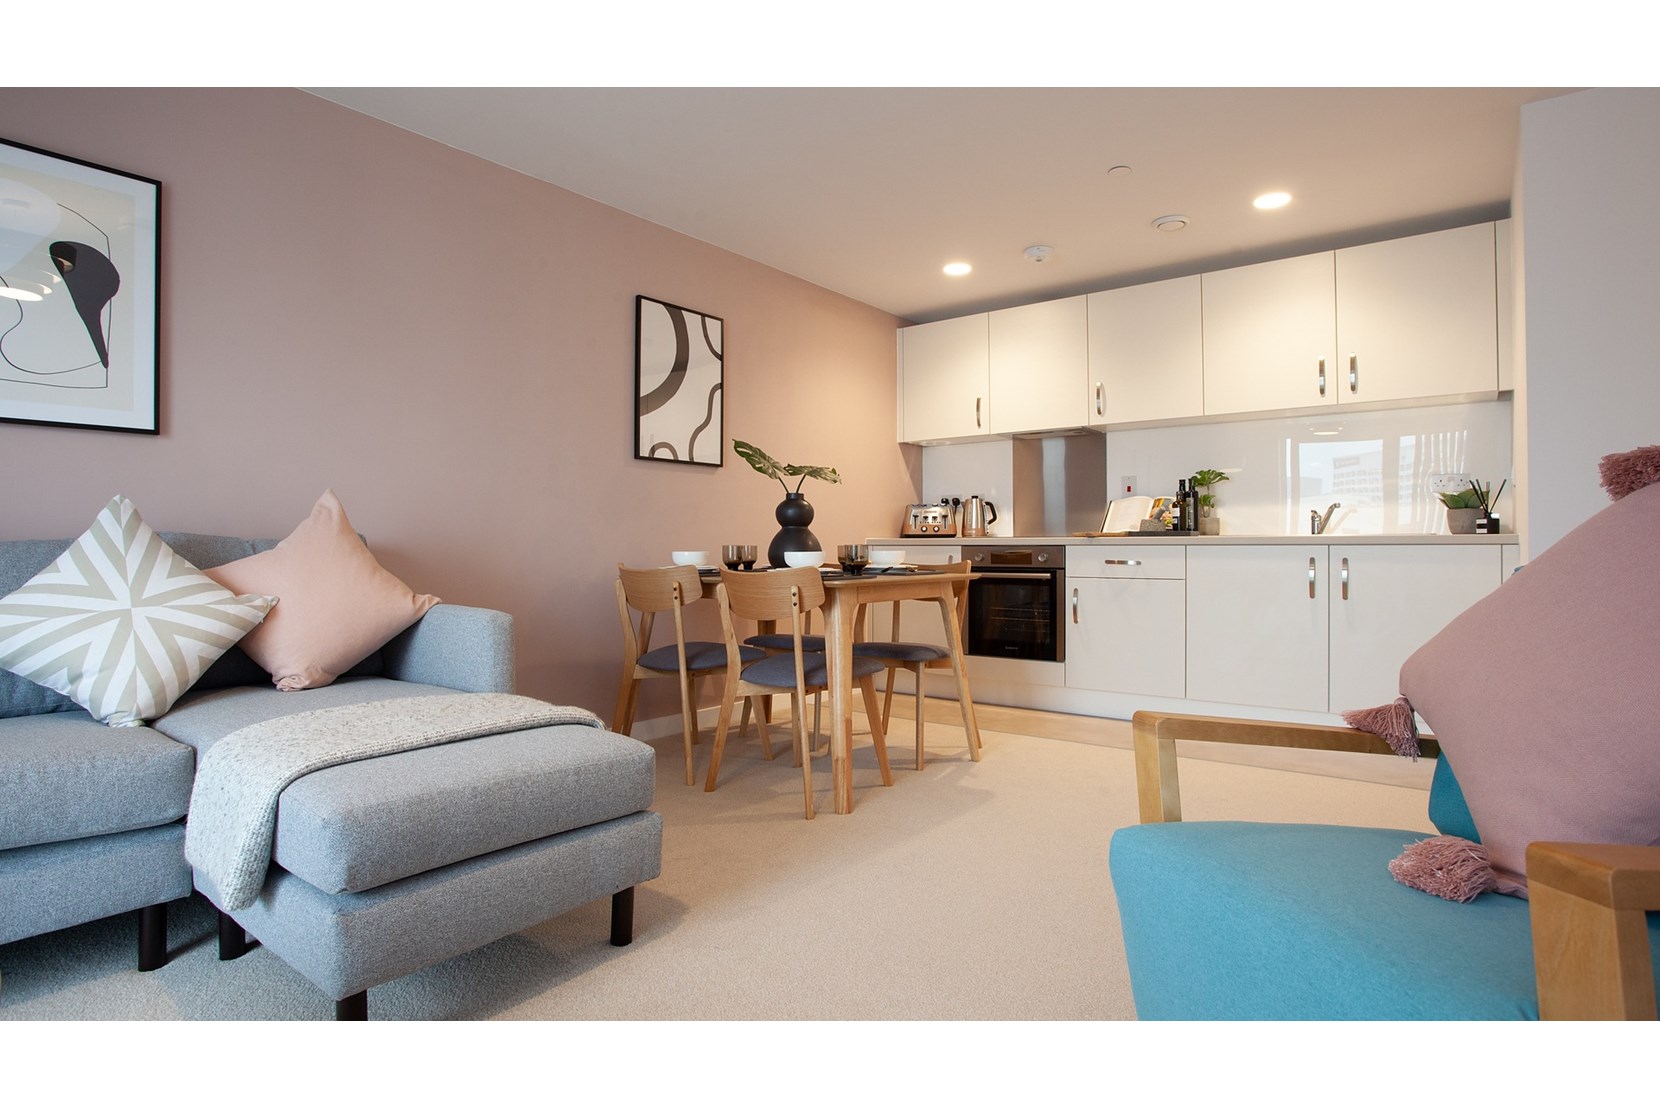 Apartments to Rent by Dandara Living at Chapel Wharf, Salford, M3, living dining kitchen area